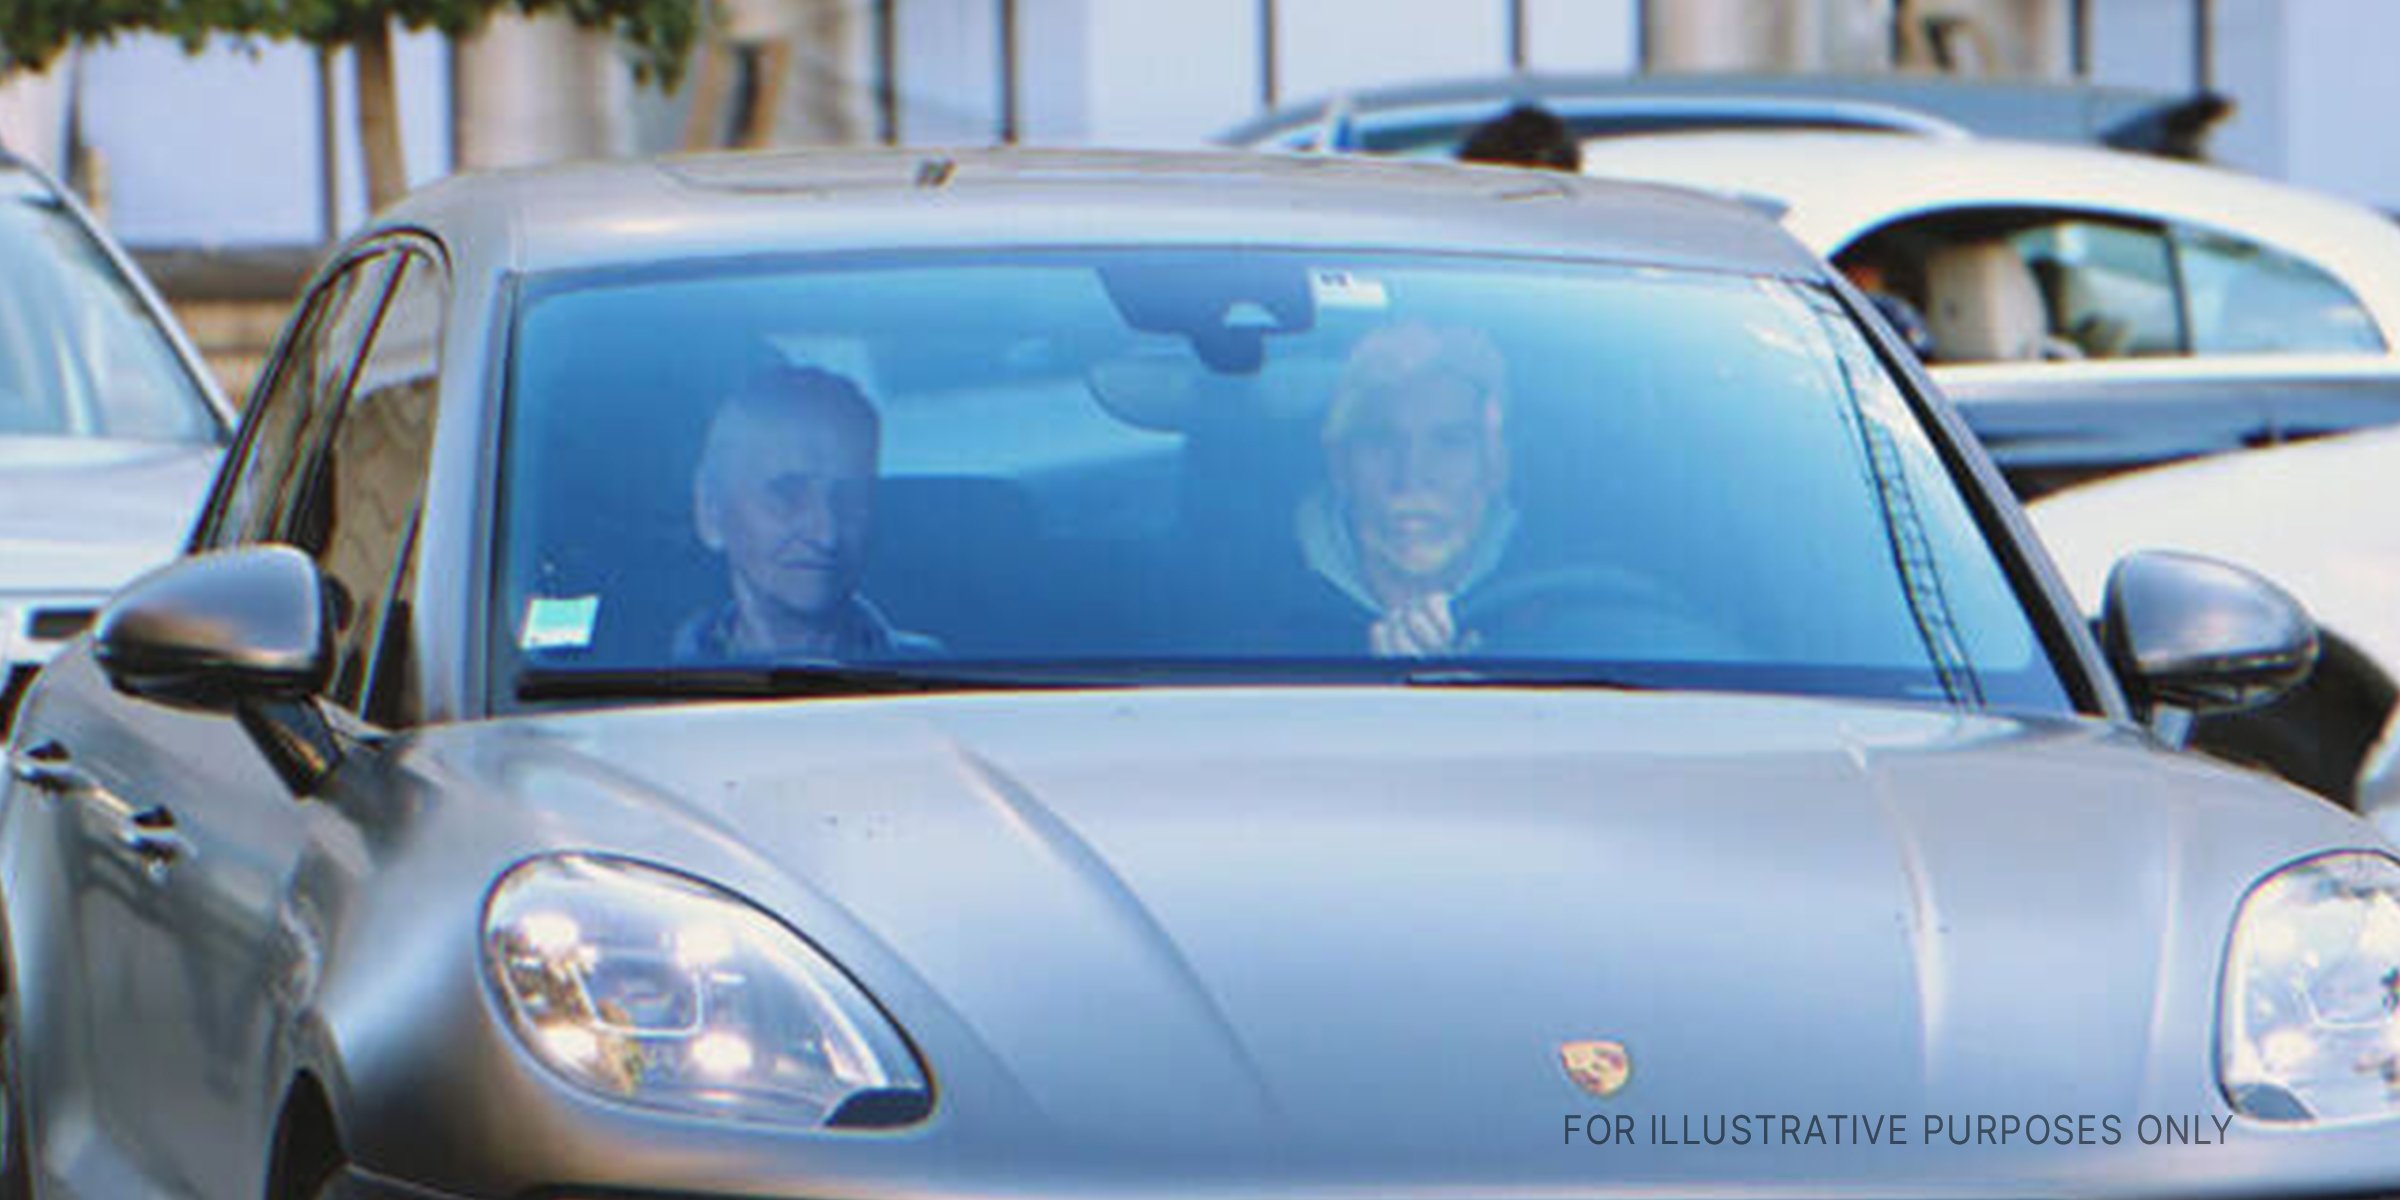 Two man driving a sports car | Source: Shutterstock